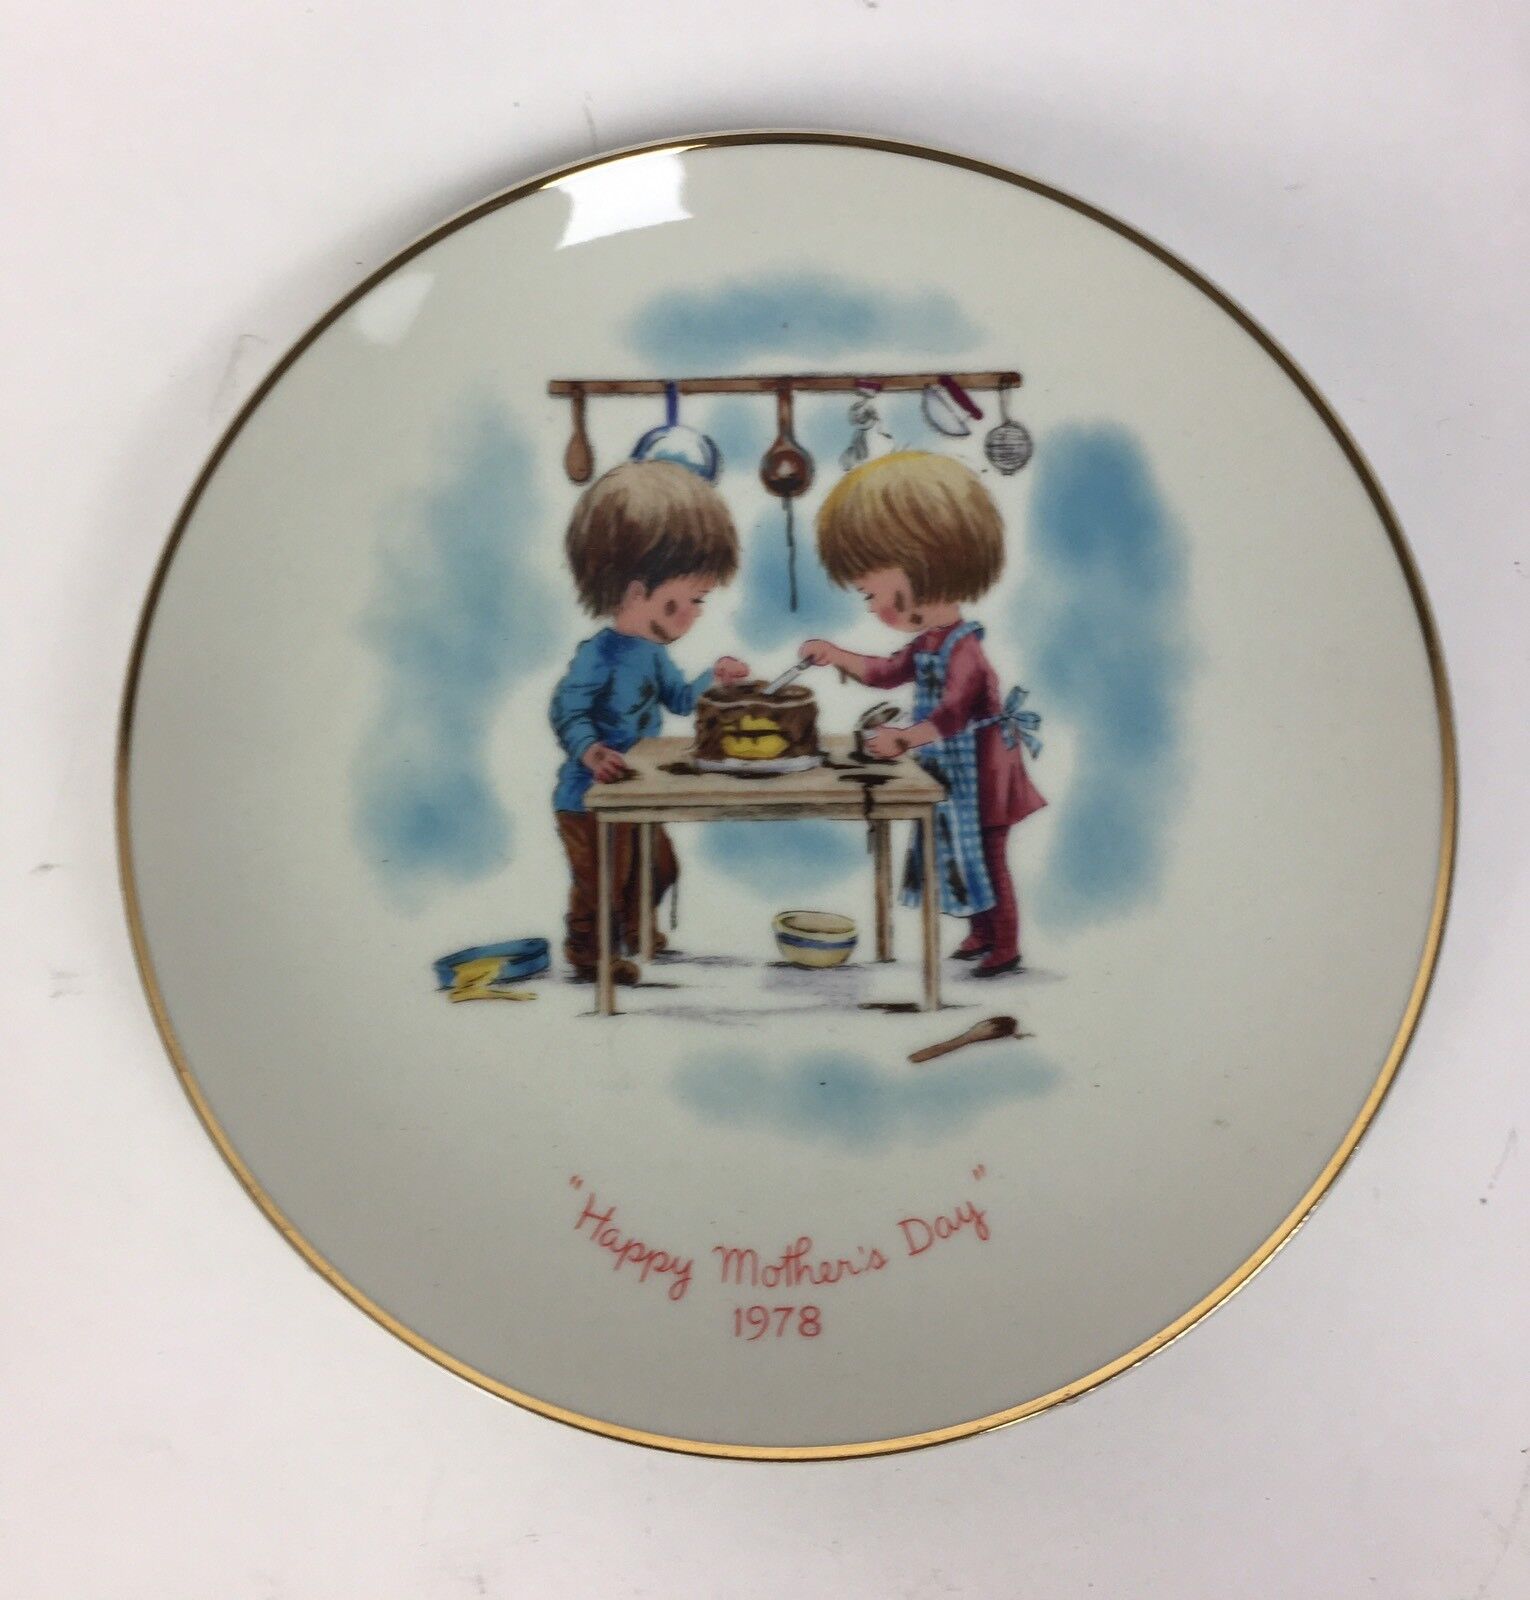 Gorham MOPPETS PLATE 1978 Happy Mothers Day 68358 - £7.84 GBP